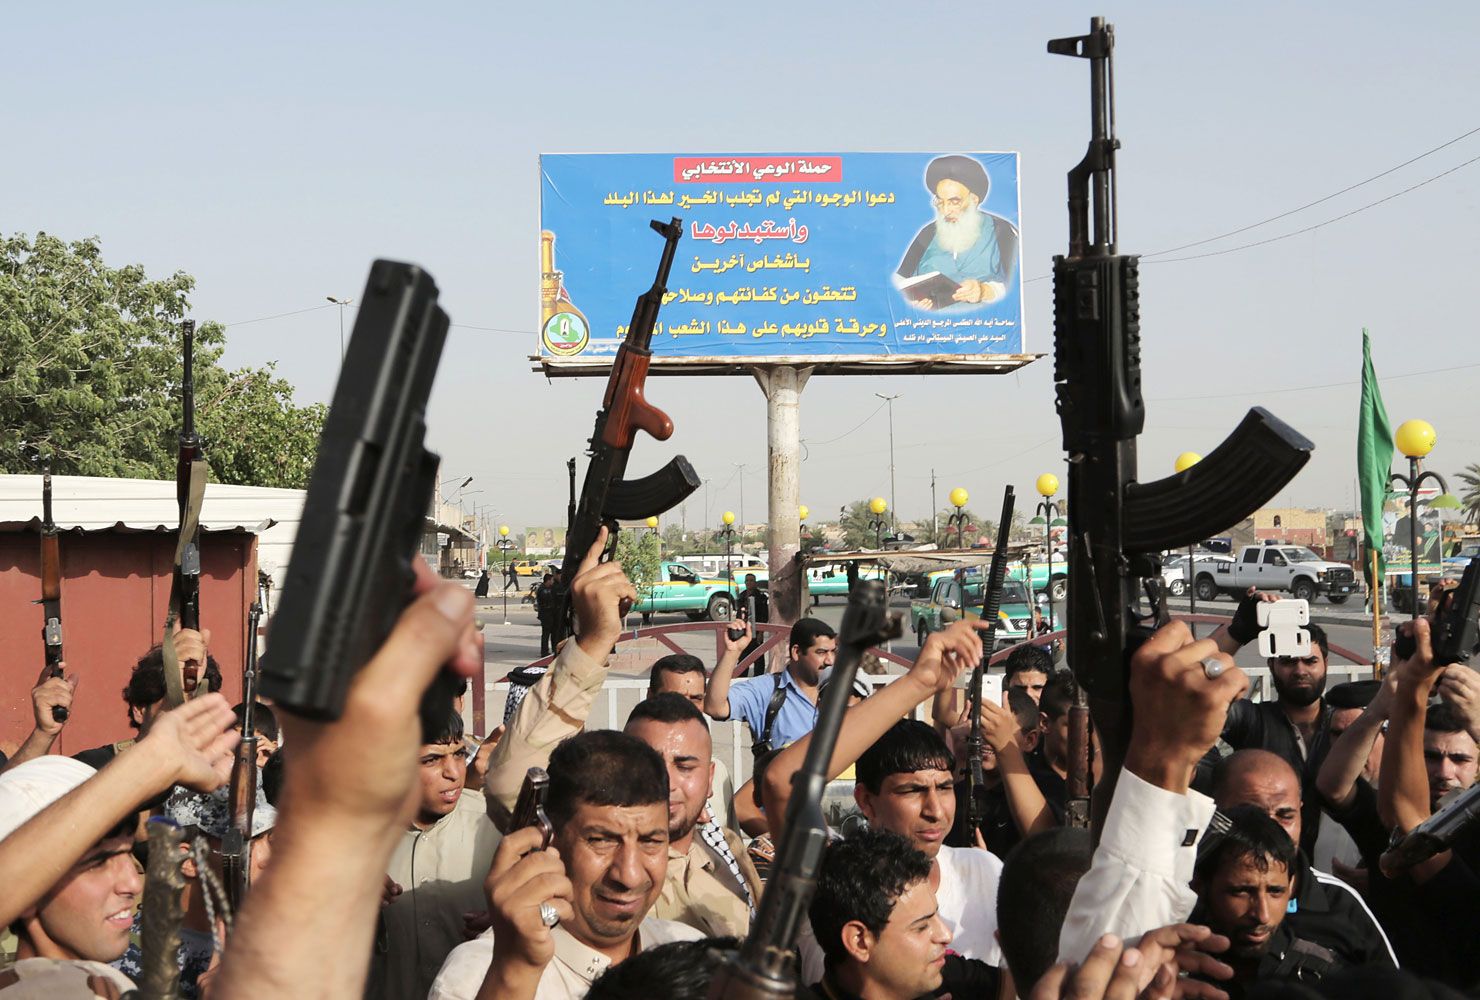 Iraqi Shiite tribal fighters raise their weapons and chant slogans against the al-Qaida-inspired Islamic State of Iraq and the Levant below a portrait of Ayatollah Ali al-Sistani, in Baghdad's Sadr City, Iraq, June 18, 2014. On Friday, Grand Ayatollah Ali al-Sistani, Iraq's top Shiite cleric, called for a new effective government in Iraq. (Khalid Mohammed—AP)